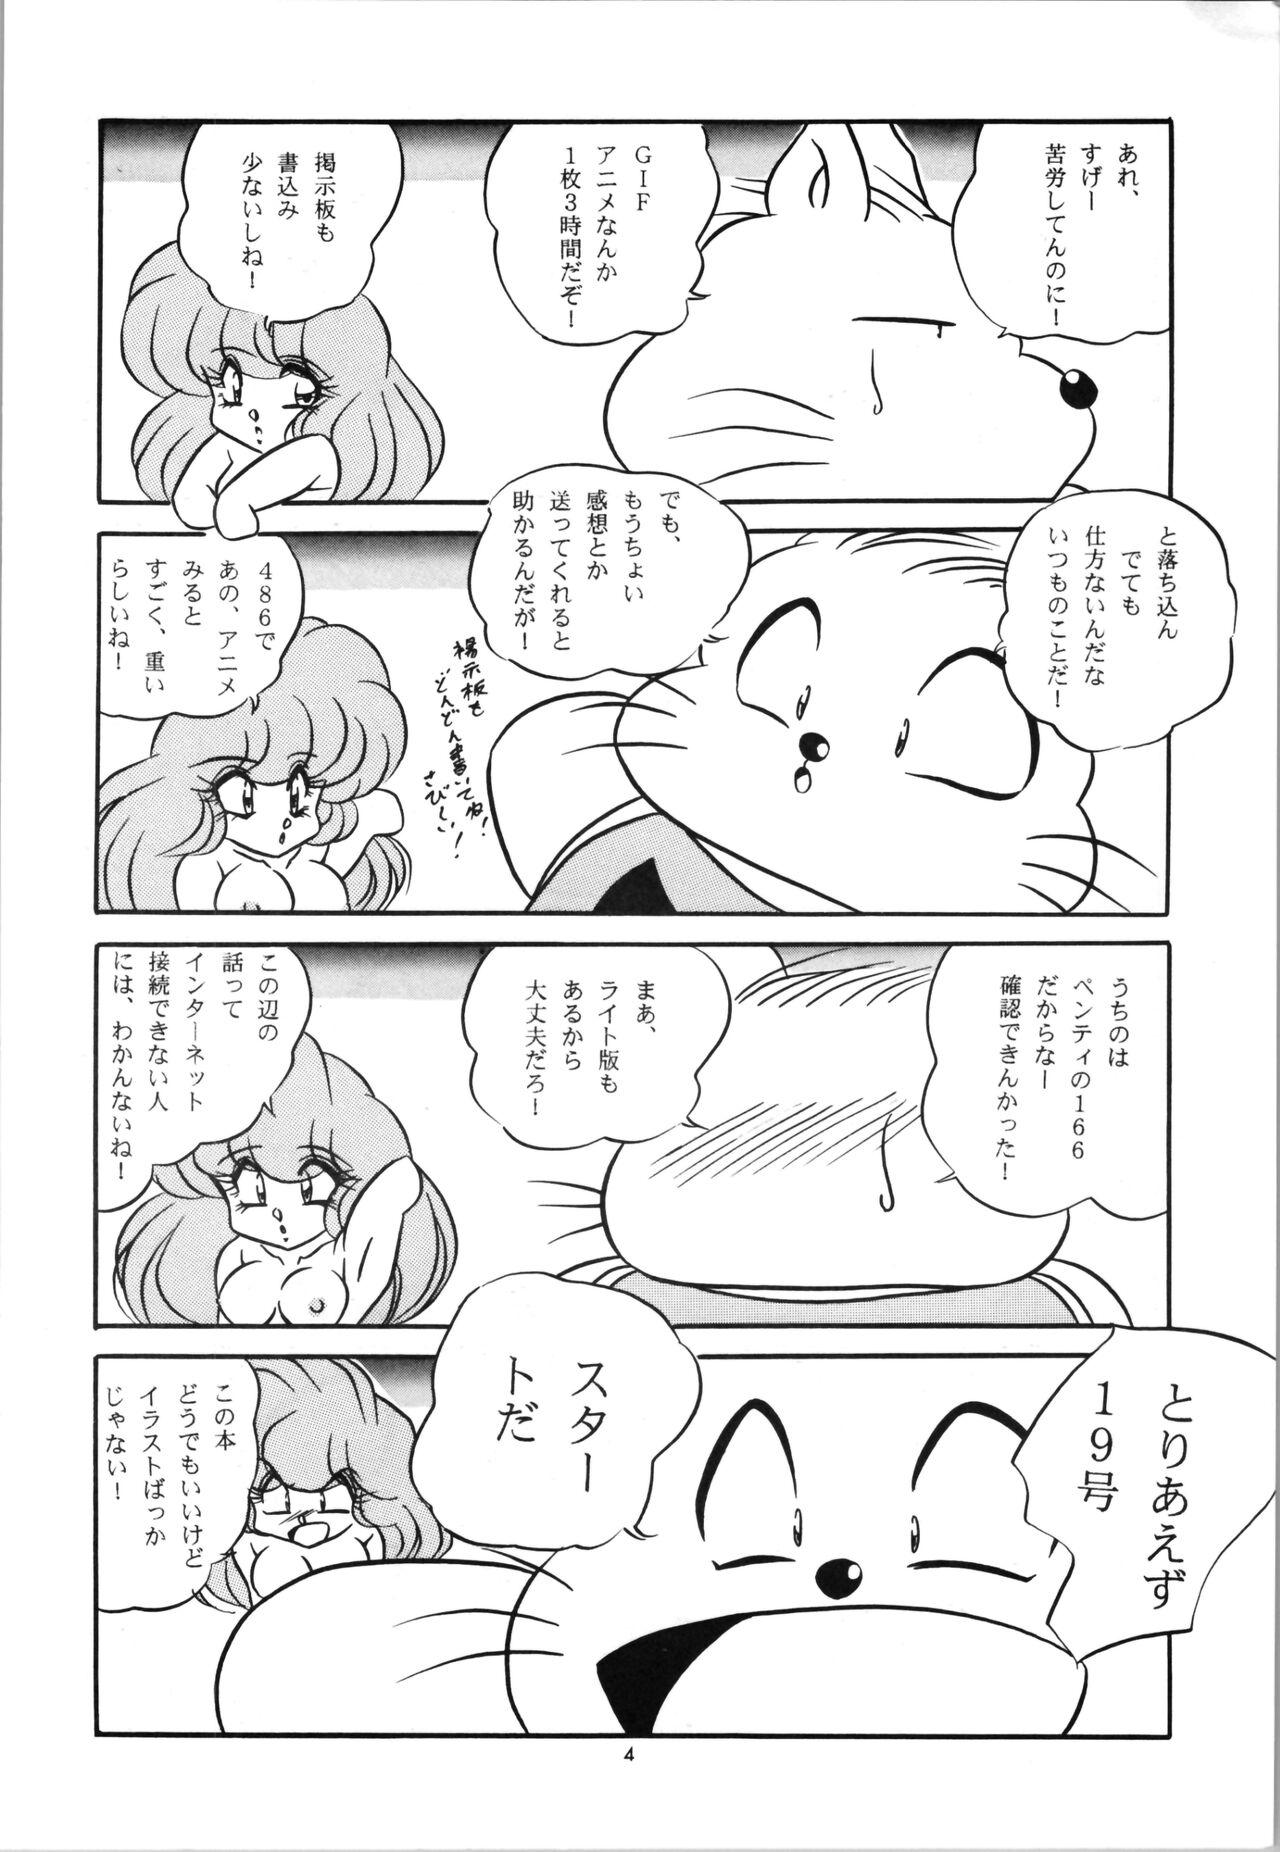 Creampie C-COMPANY SPECIAL STAGE 19 - Ranma 12 White Girl - Page 6